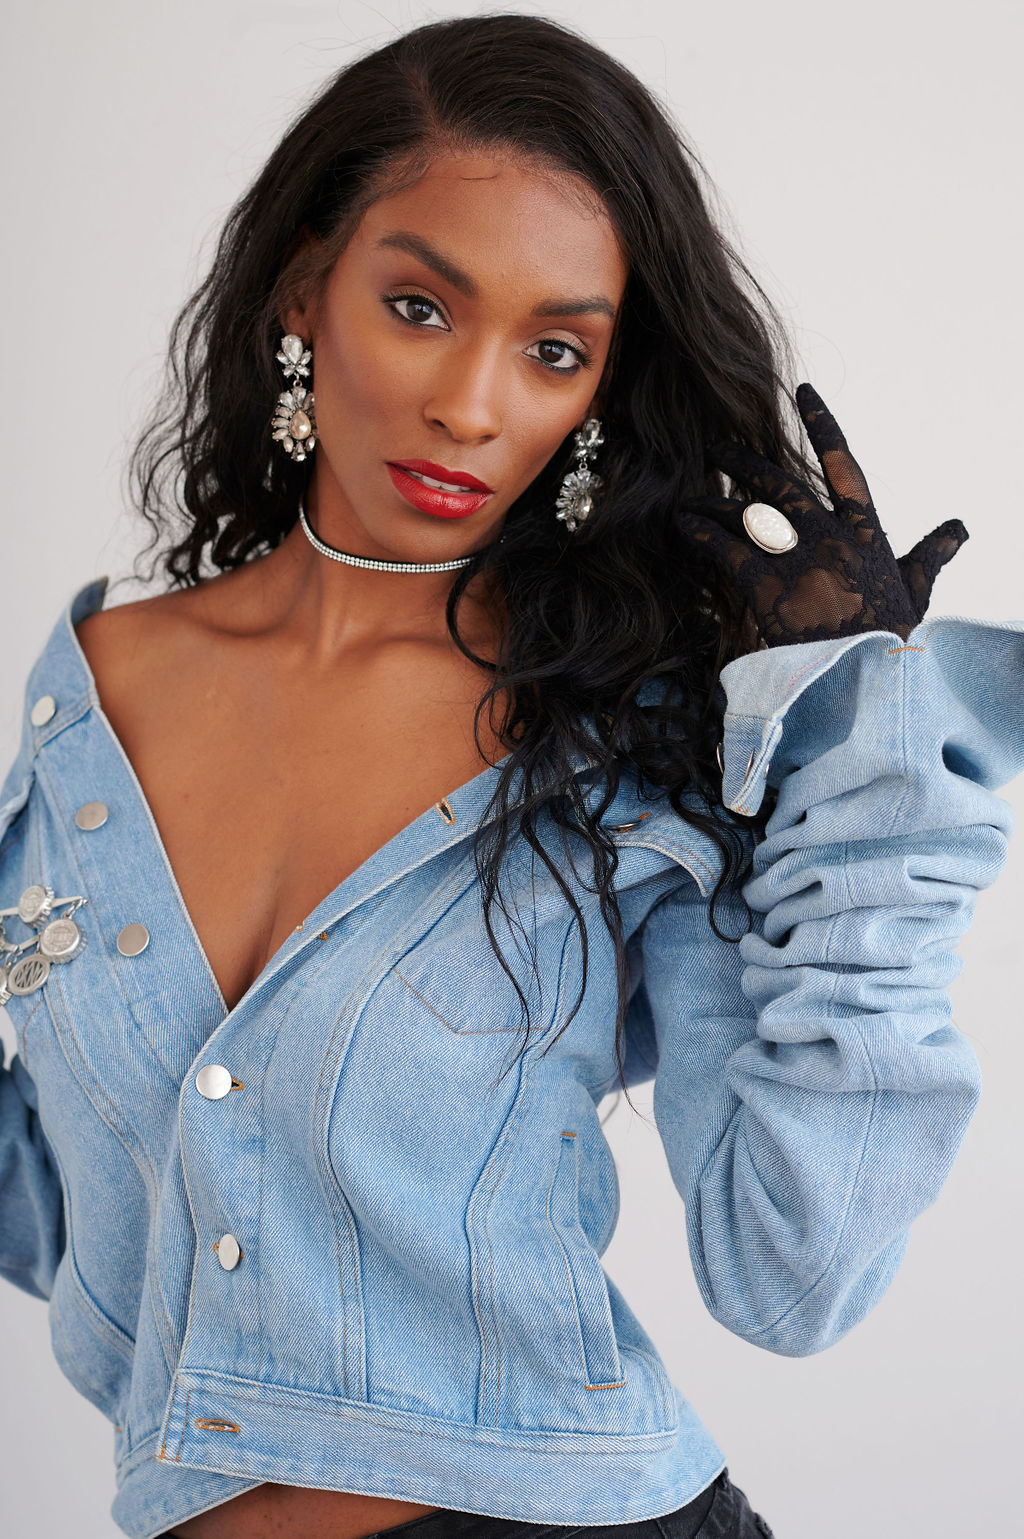 Annjulia Smalls In Y/Project-styled by melissa-lcm-sheldon botler photography-denim jacket-elongated sleeves-high fashion